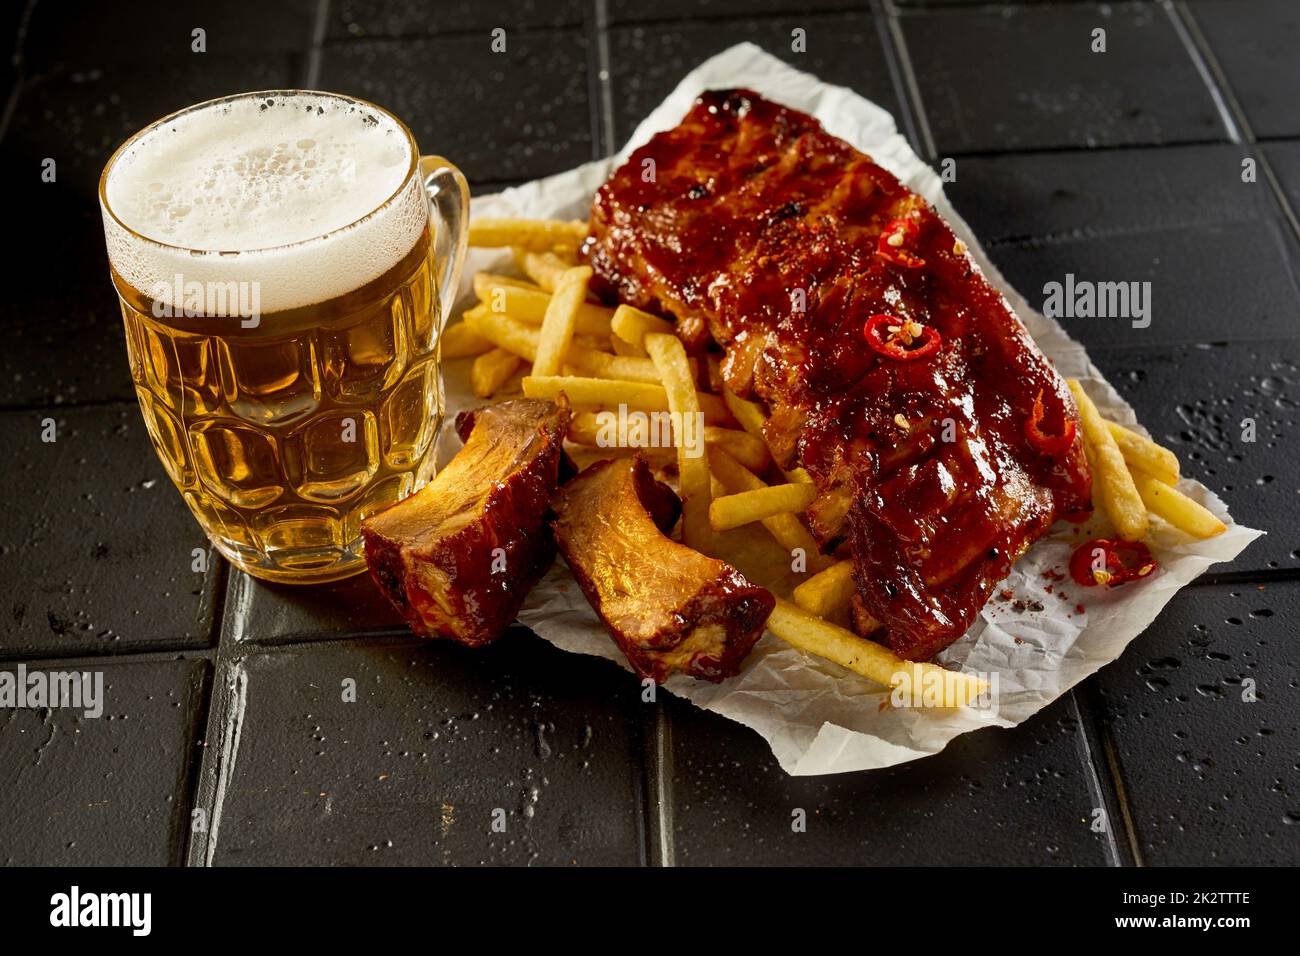 Beer and tasty fast food placed on table Stock Photo